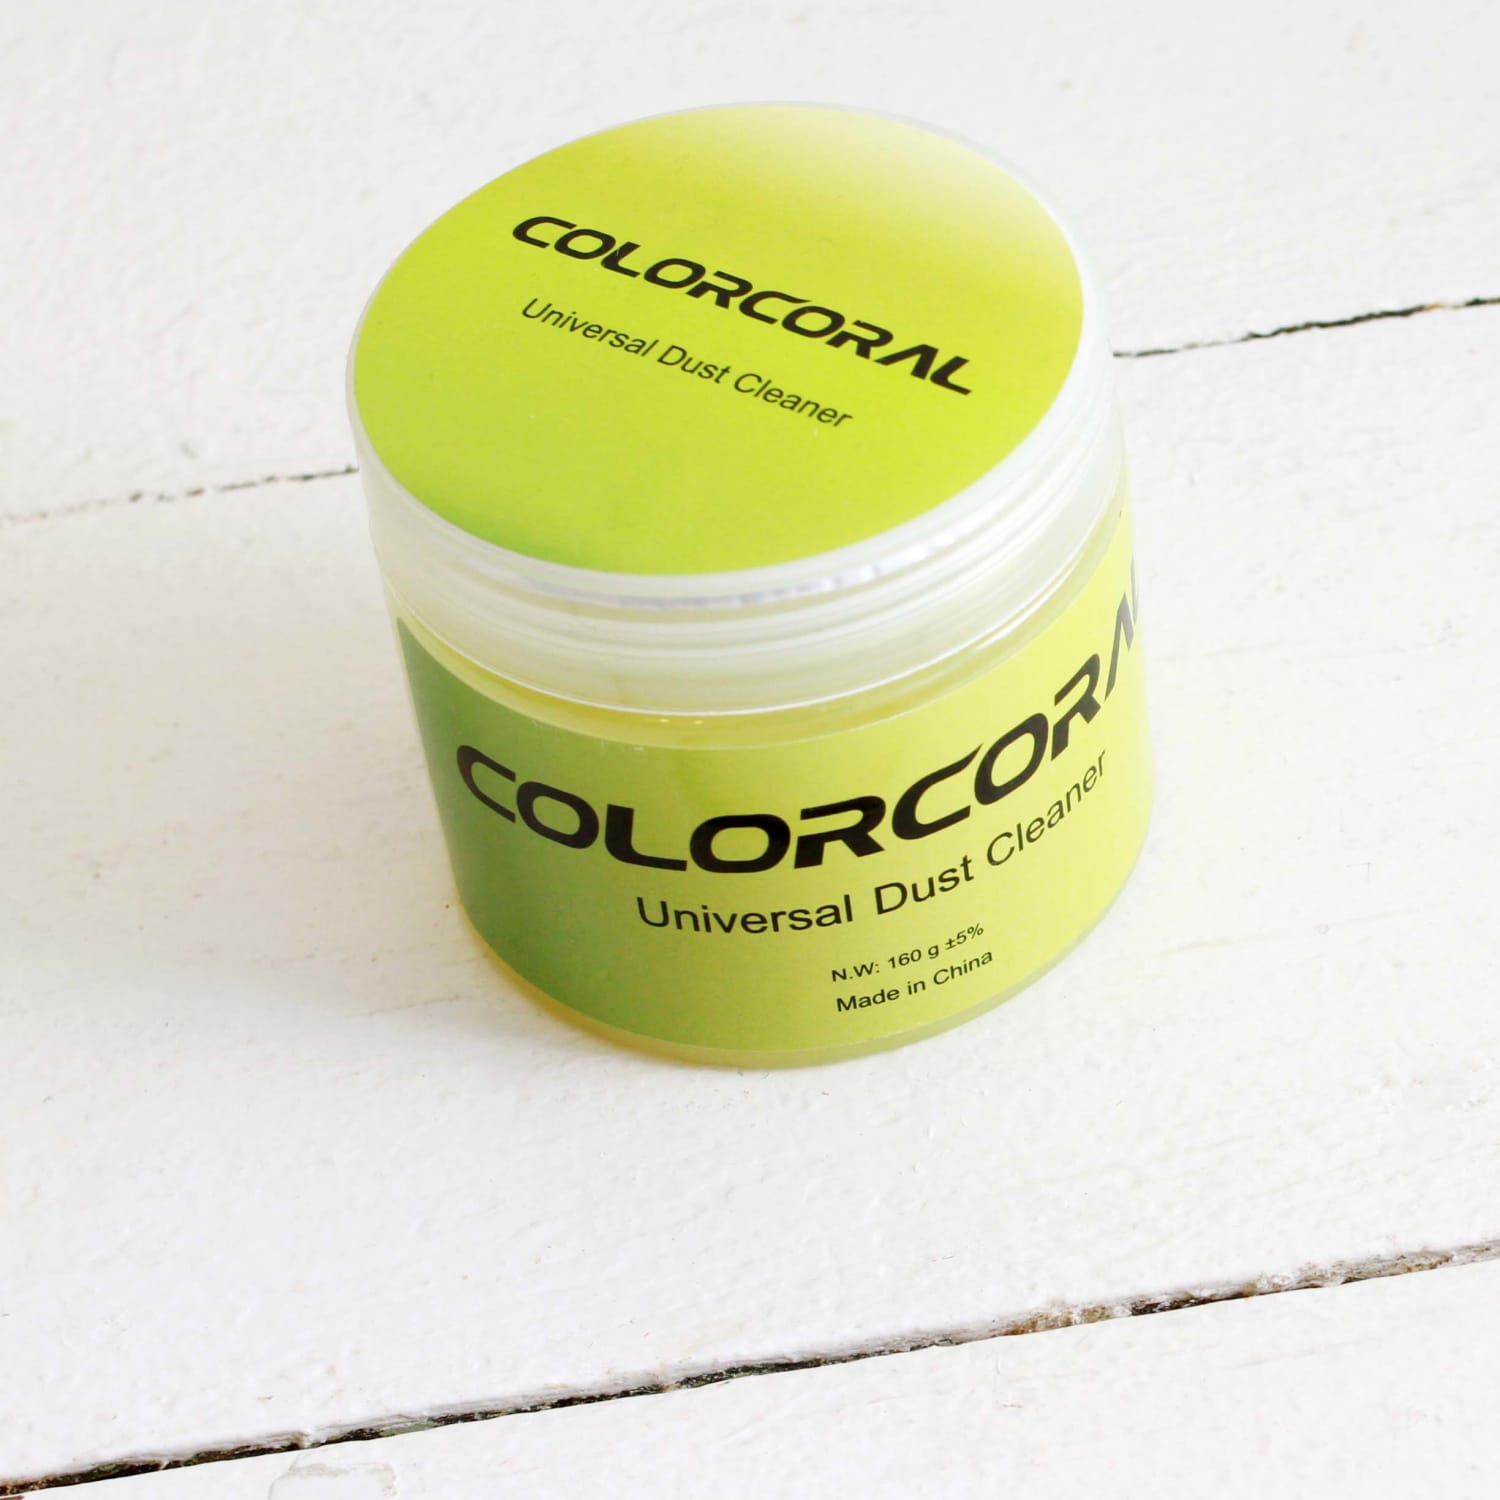 ColorCoral Universal Cleaning Gel is on sale at